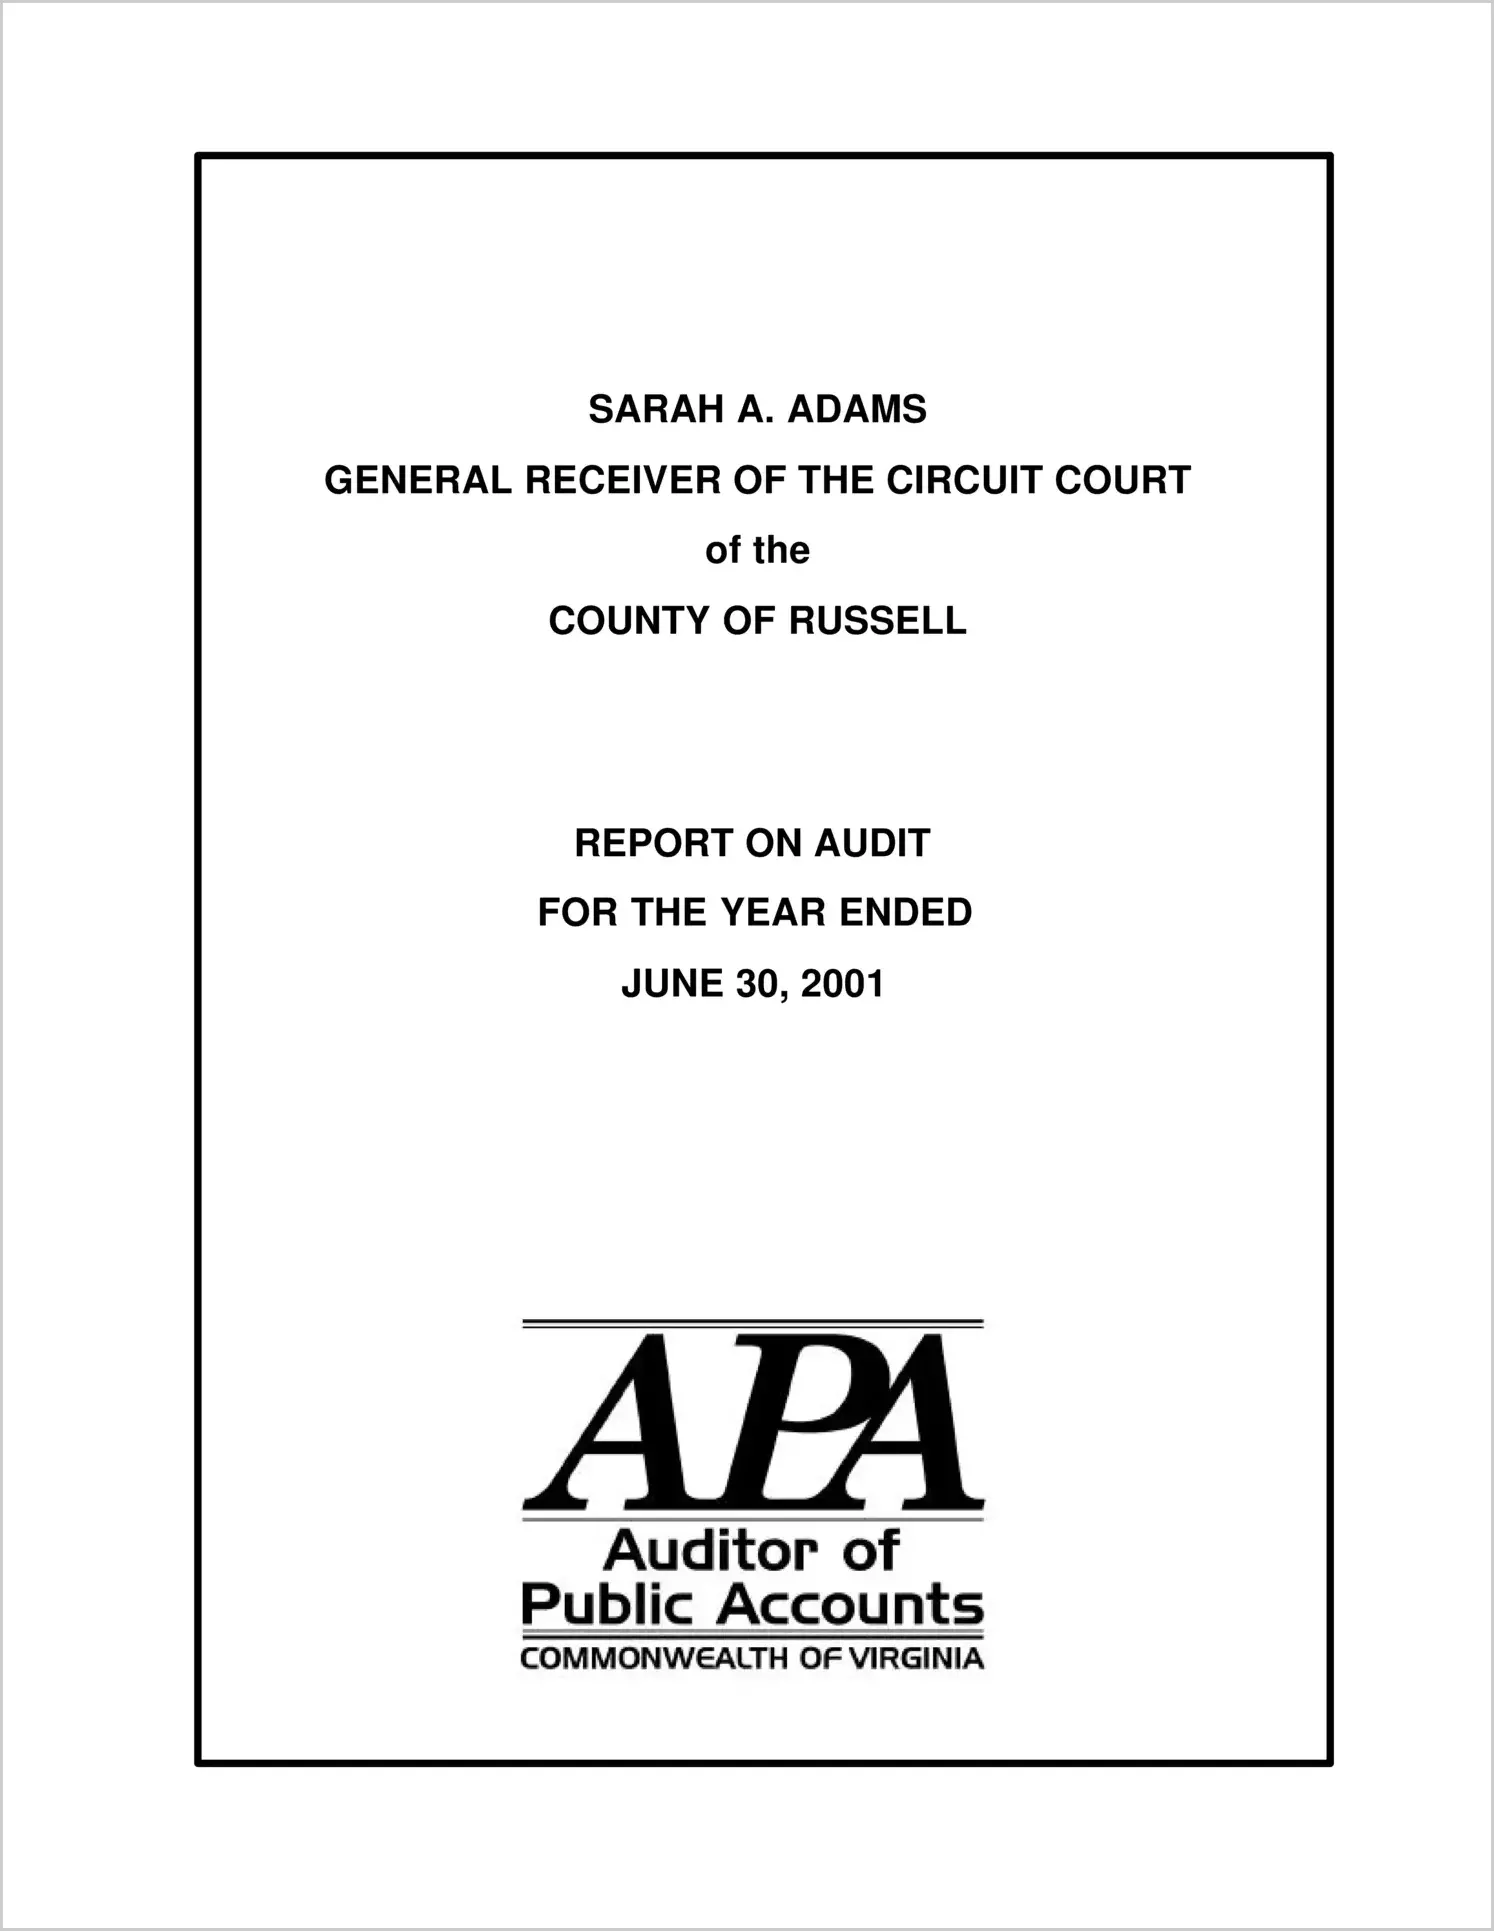 General Receiver of the Circuit Court of the County of Russell for the year ended June 30, 2001